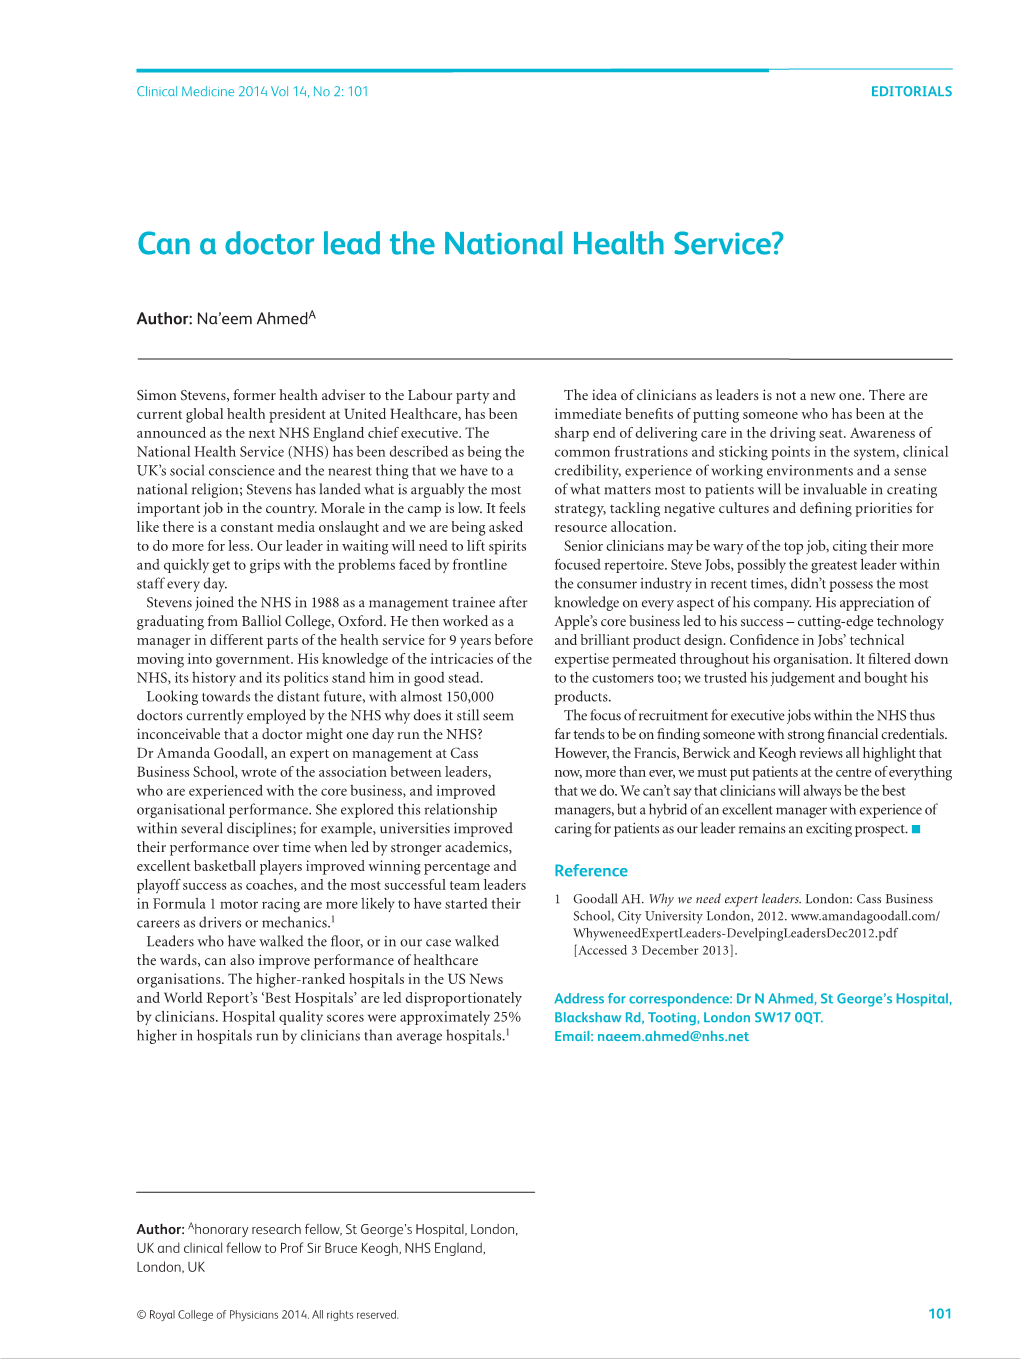 Can a Doctor Lead the National Health Service?